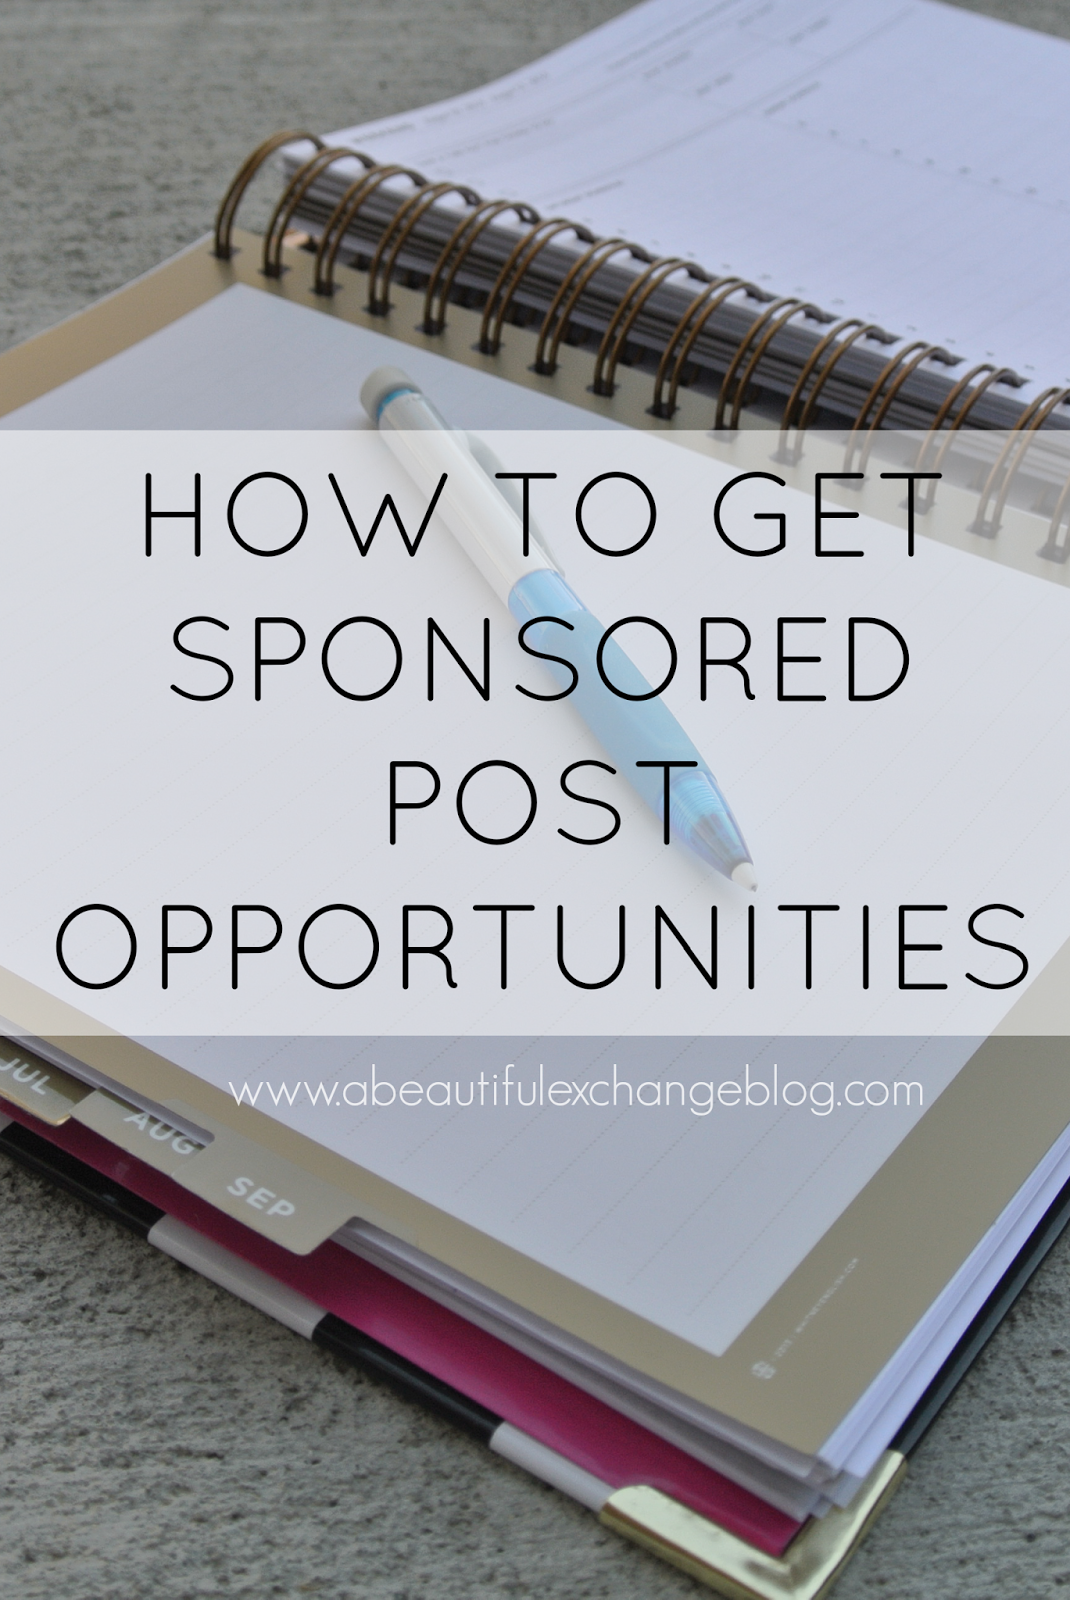 How to get sponsored post opportuni